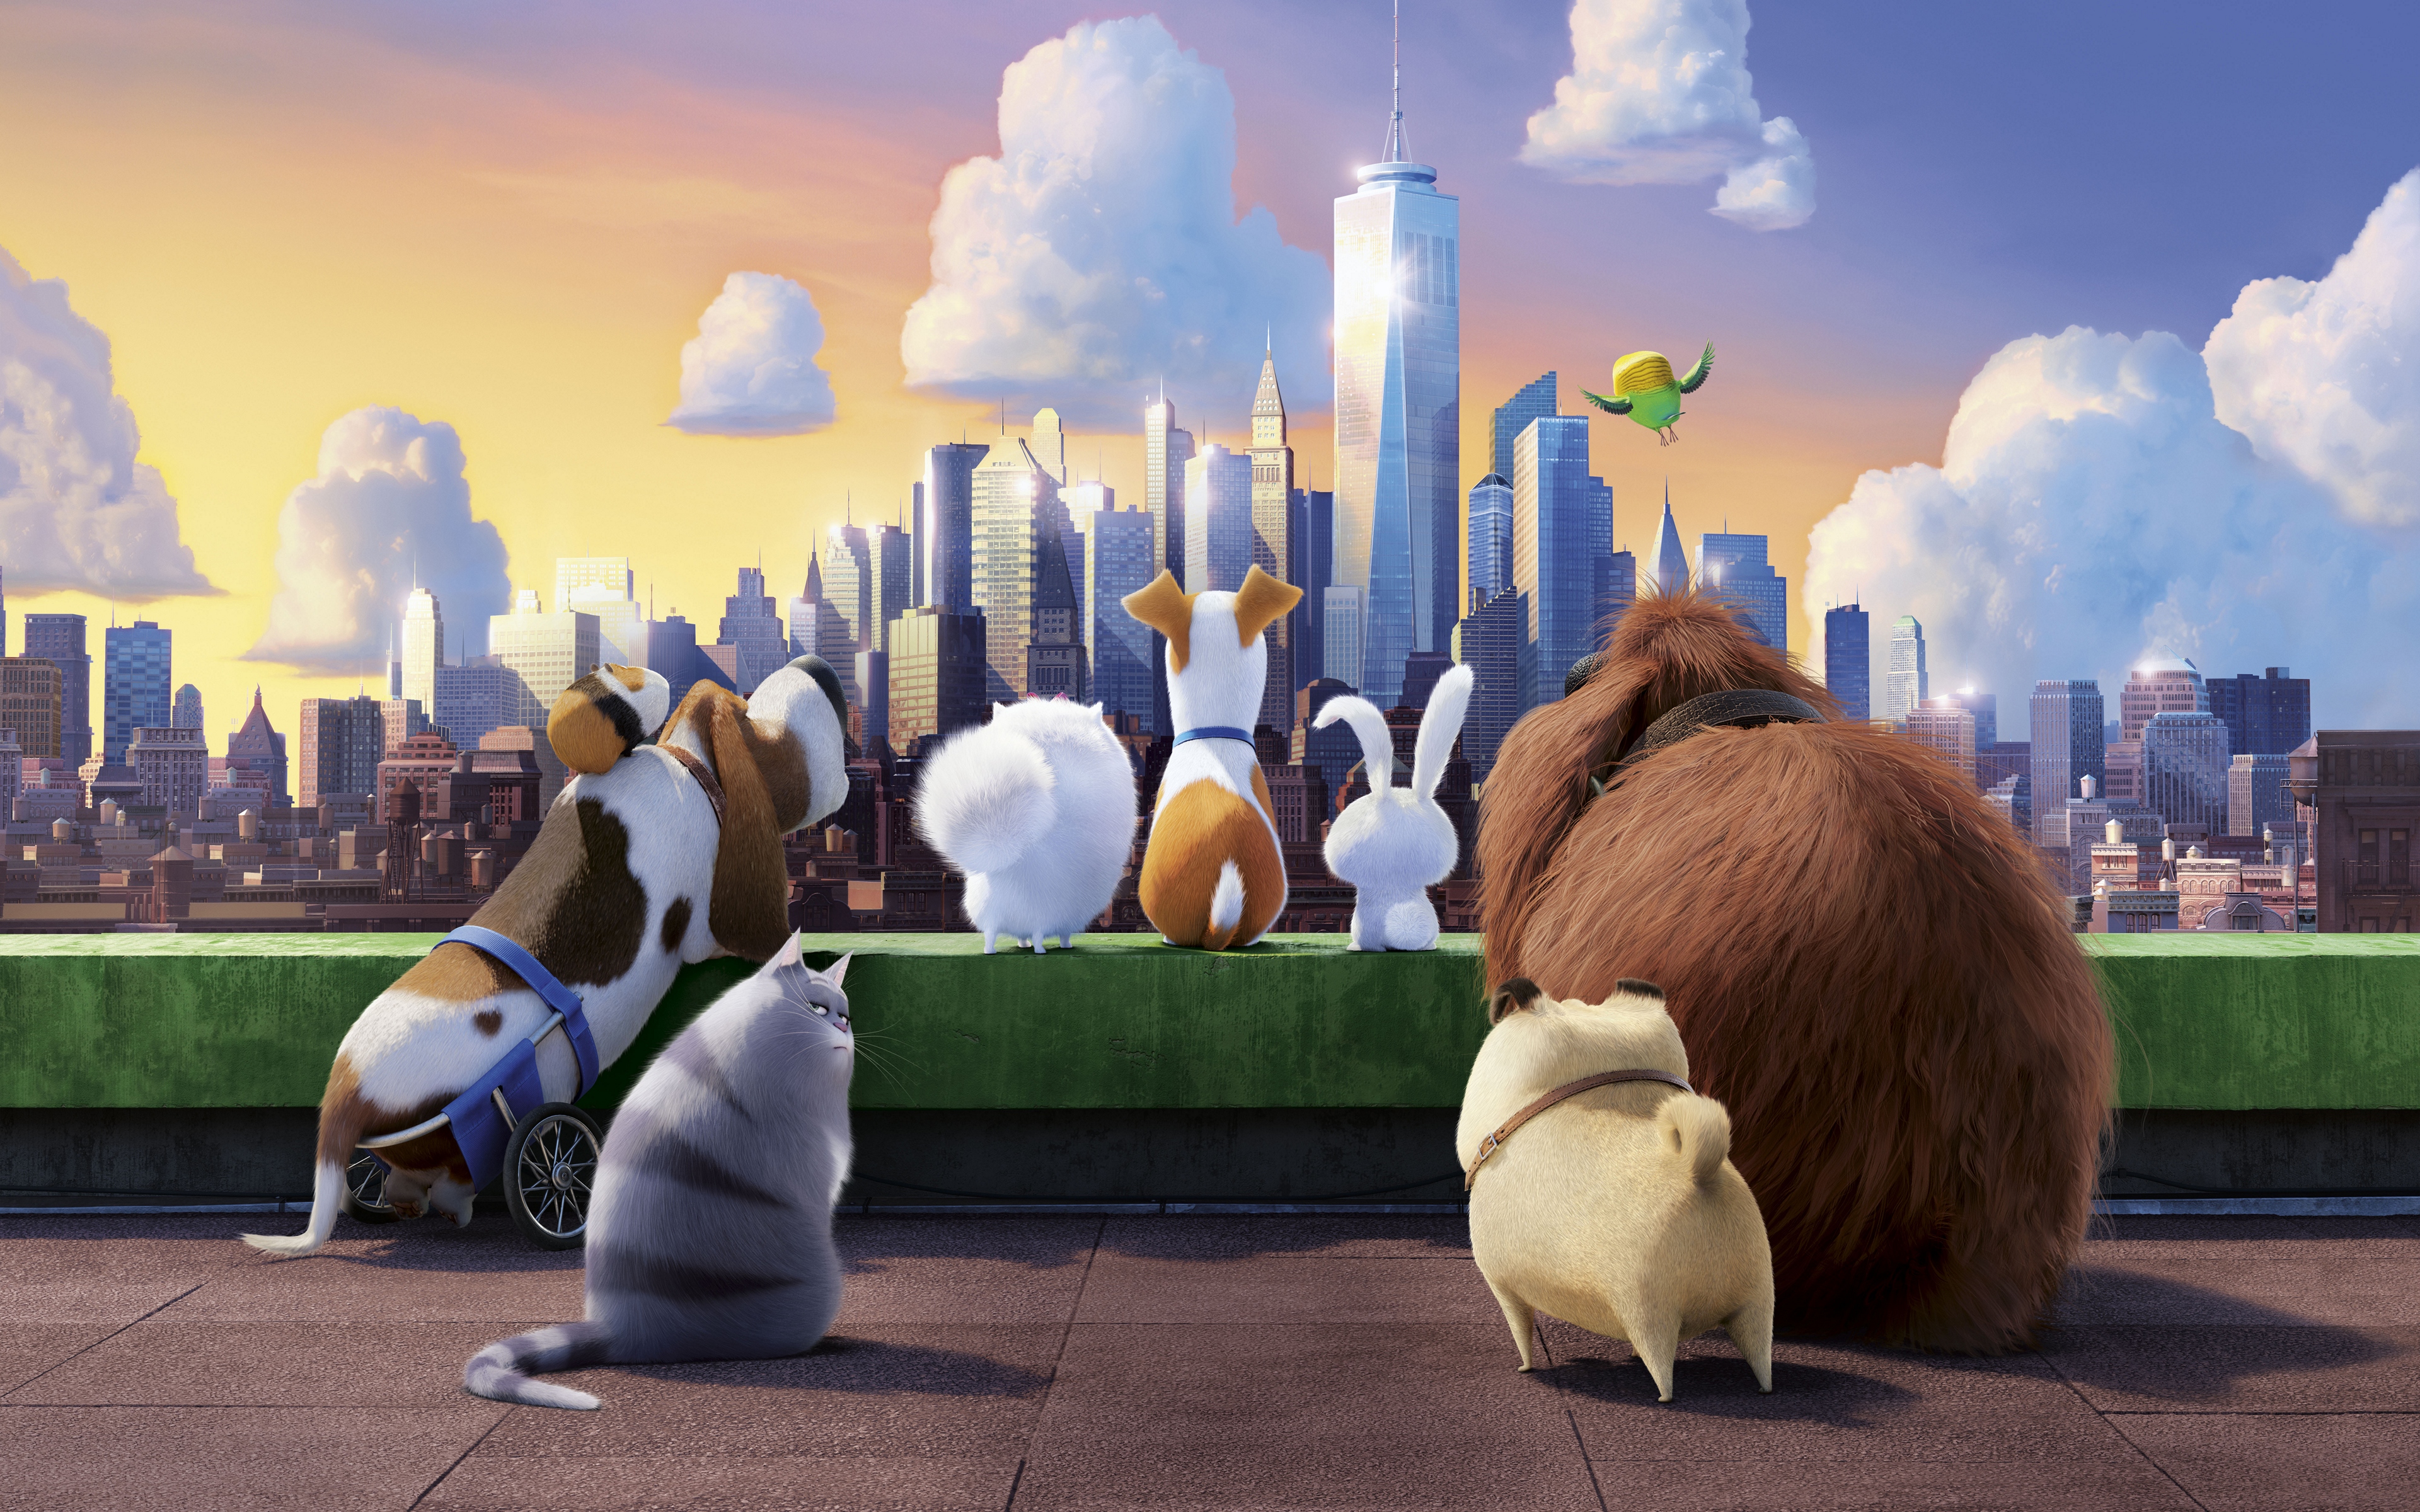 The Secret Life Of Pets Animals Movies Animation City Pet Dog Cats Birds Building Clouds Sunset Suns 3840x2400